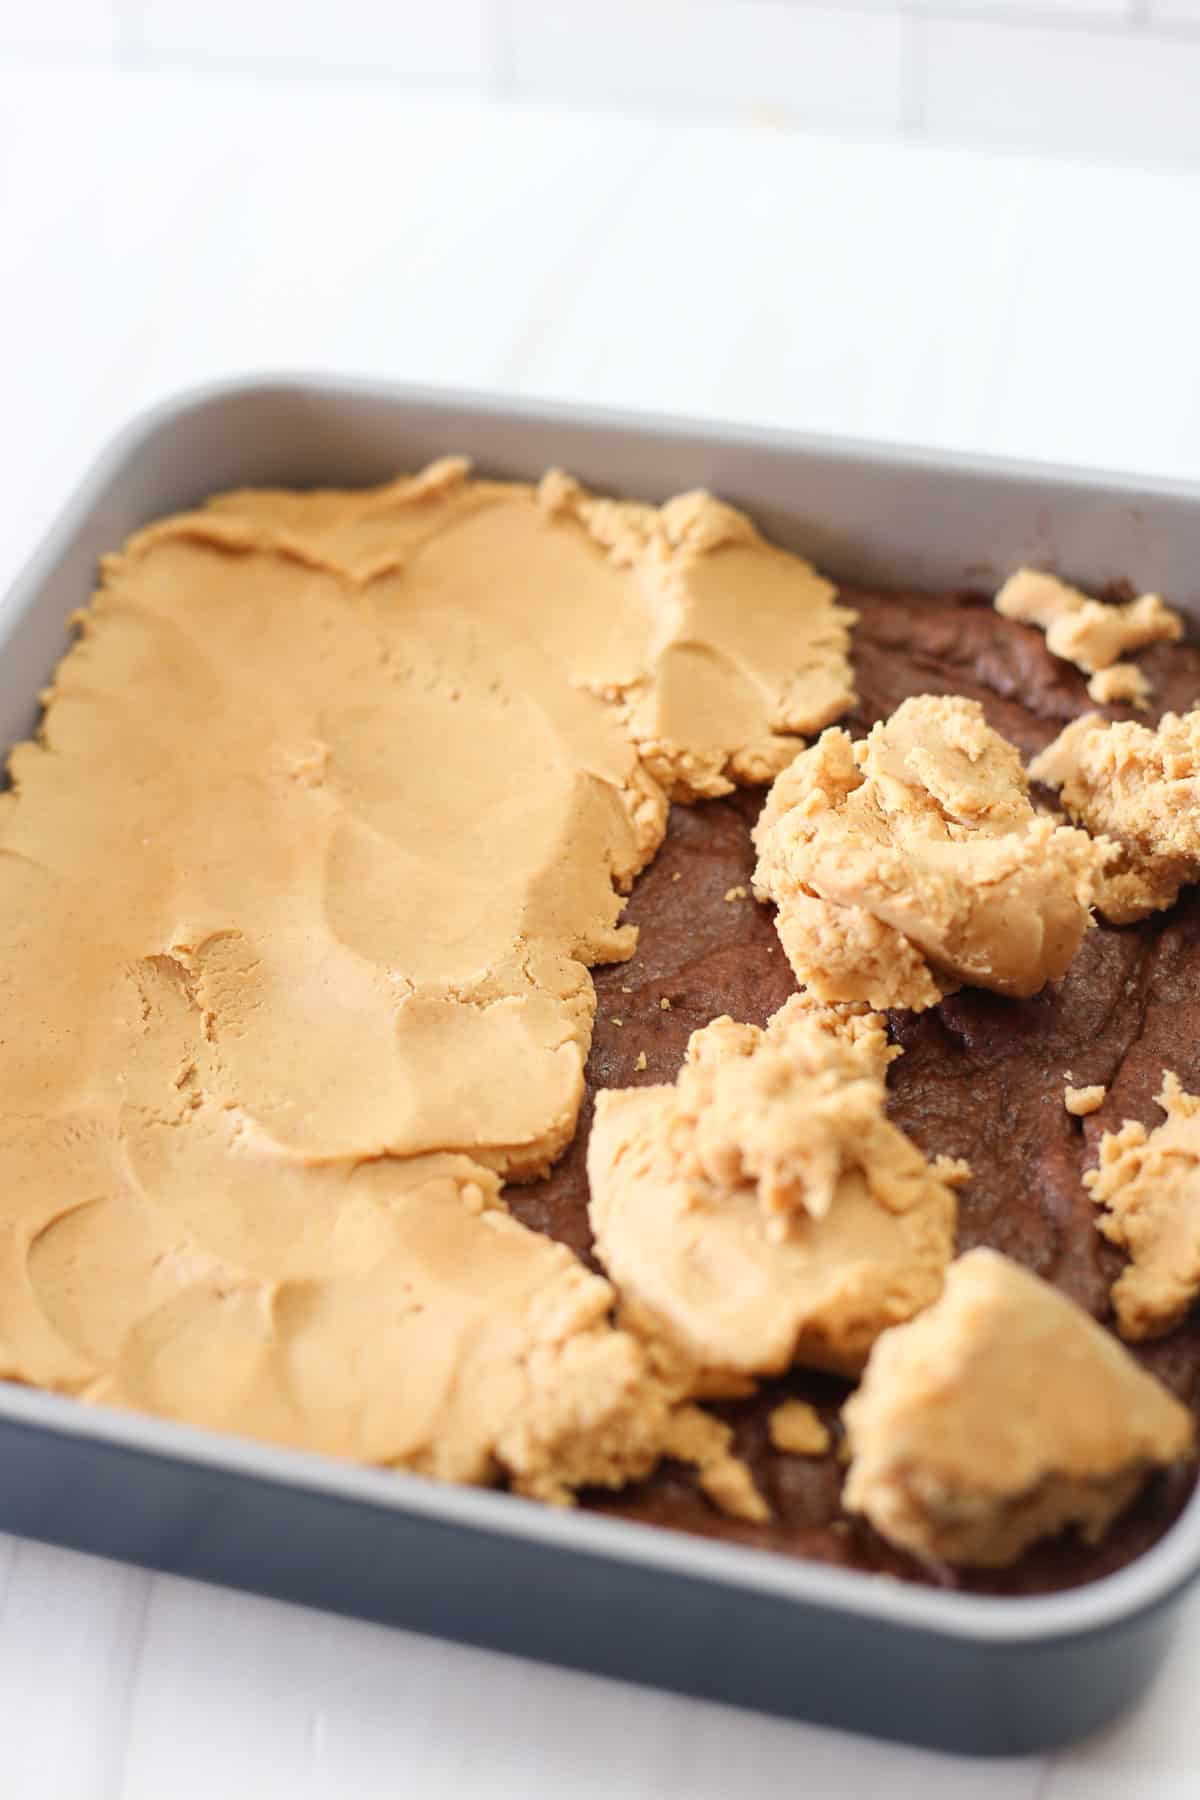 Peanut butter layer being spread out on top of brownies in a pan for Buckeye Brownies.